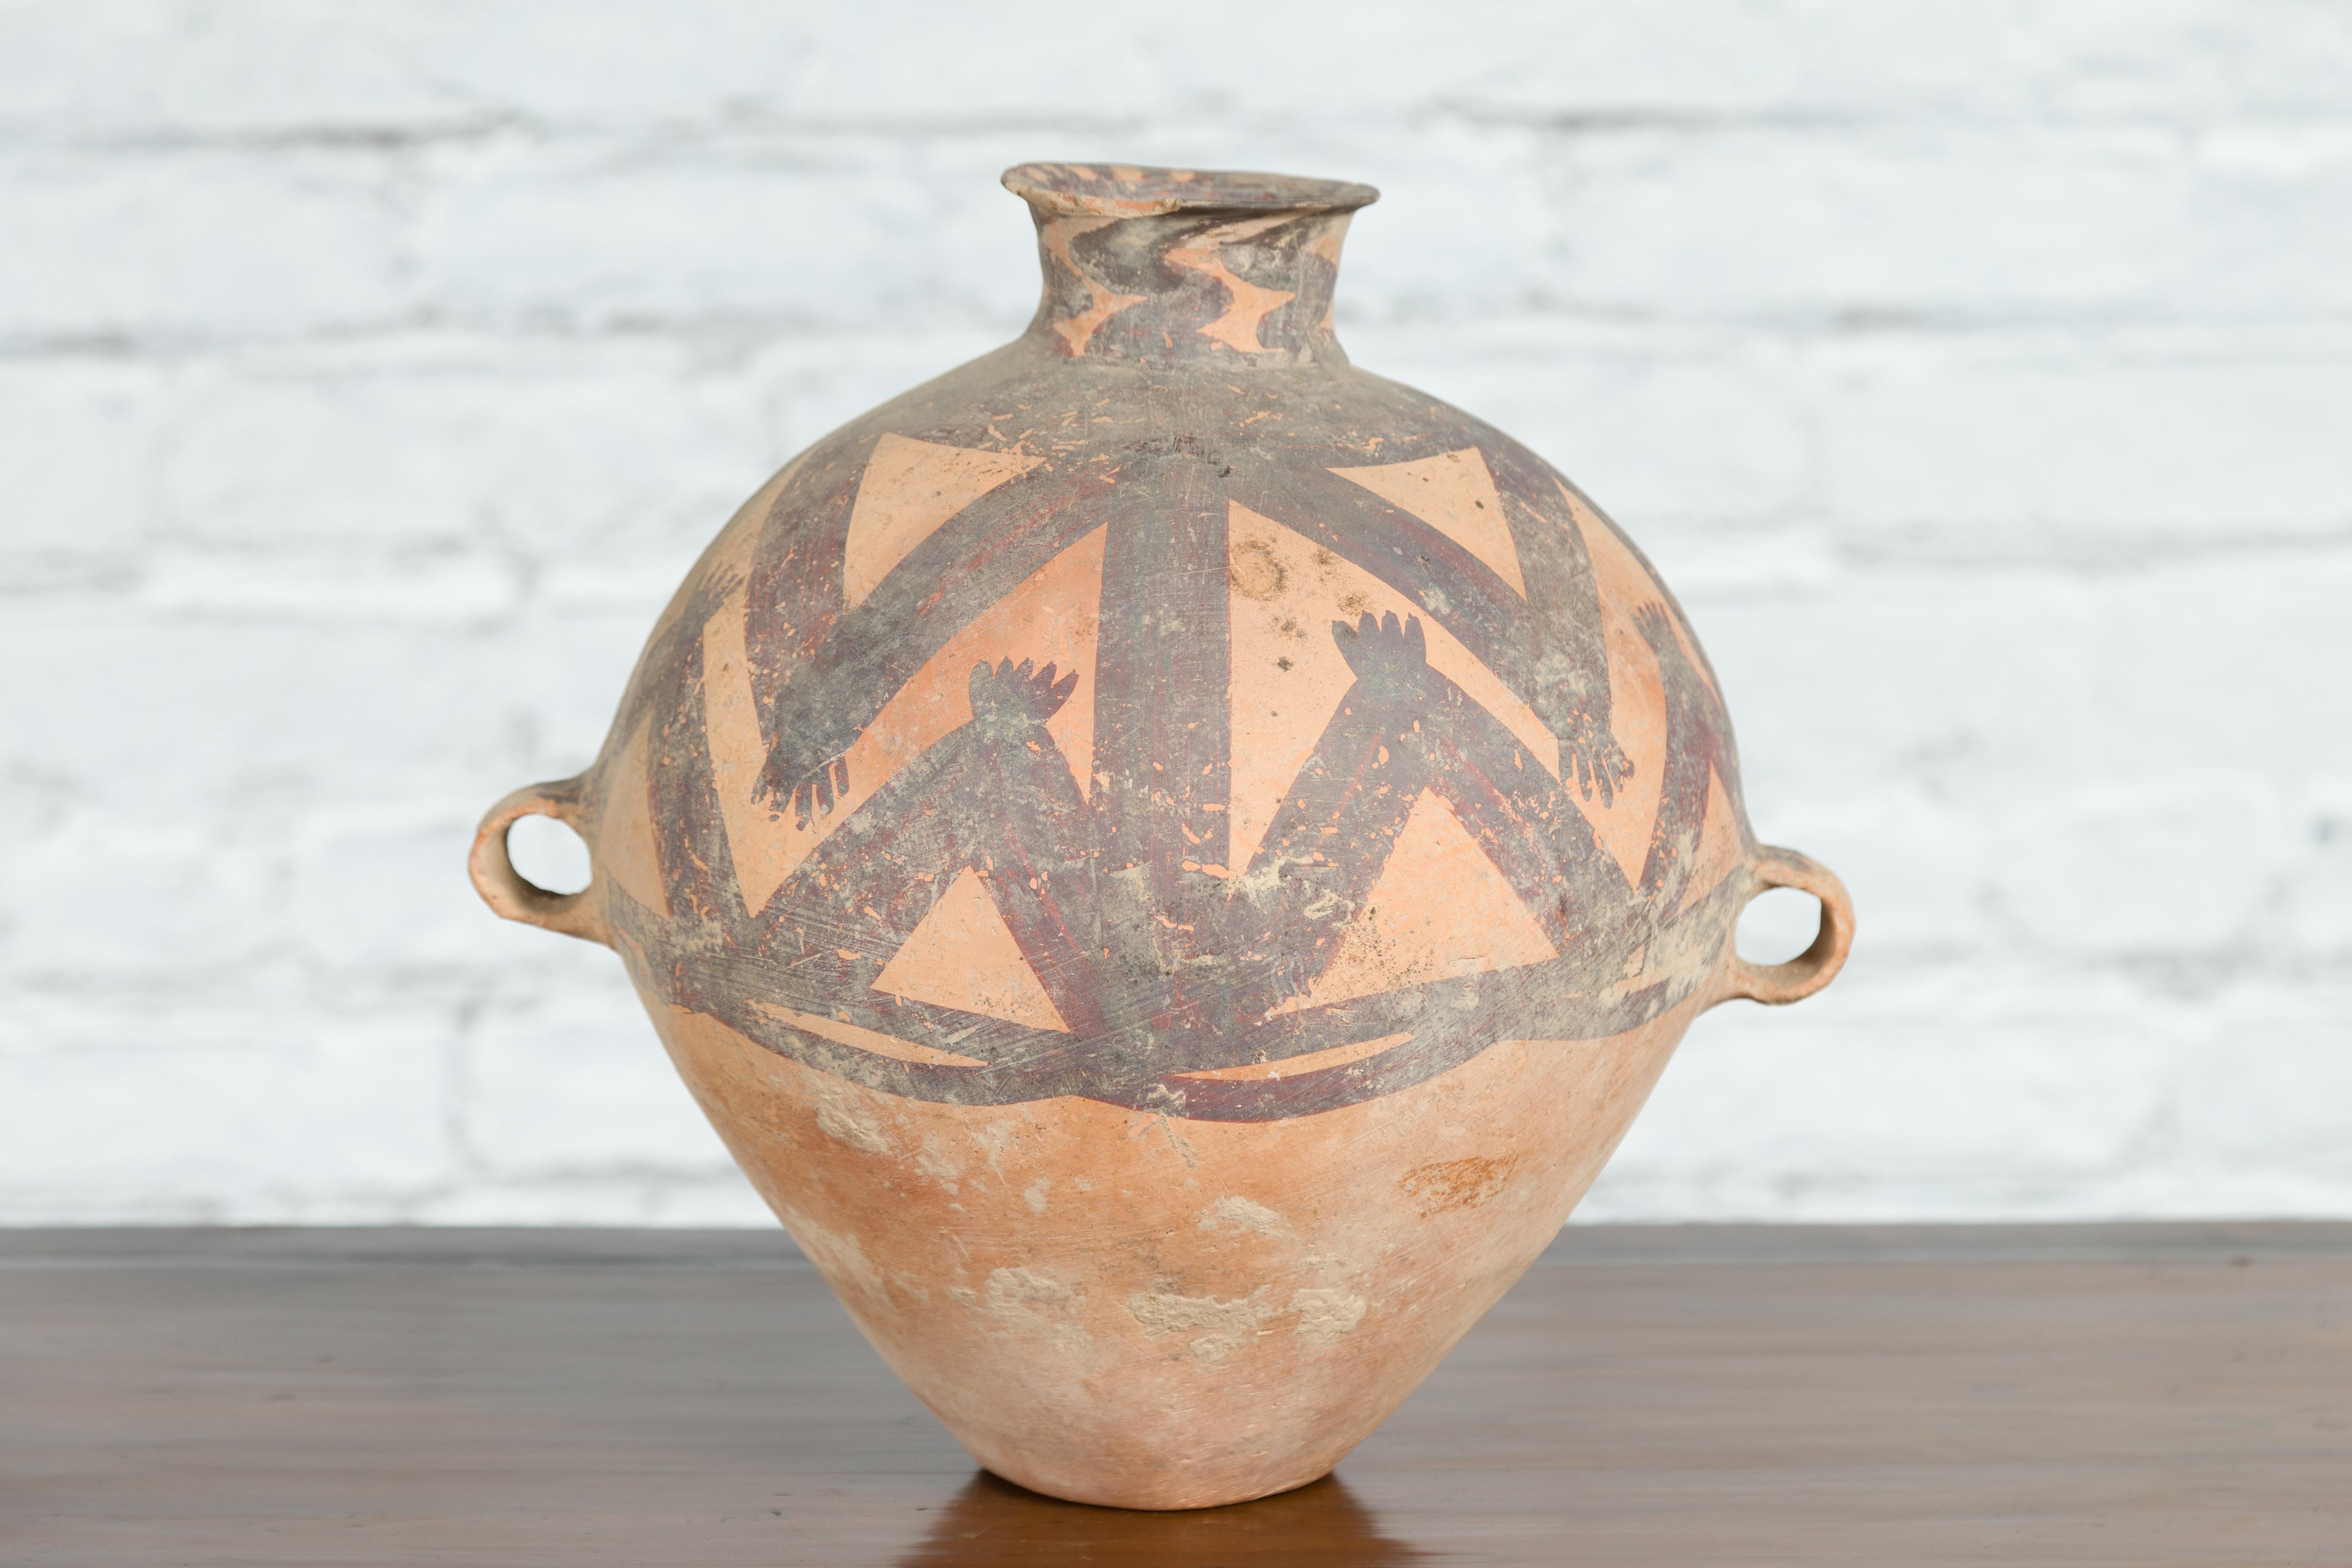 Chinese Neolithic Period 4000 BC Terracotta Storage Jar with Geometric Décor 7